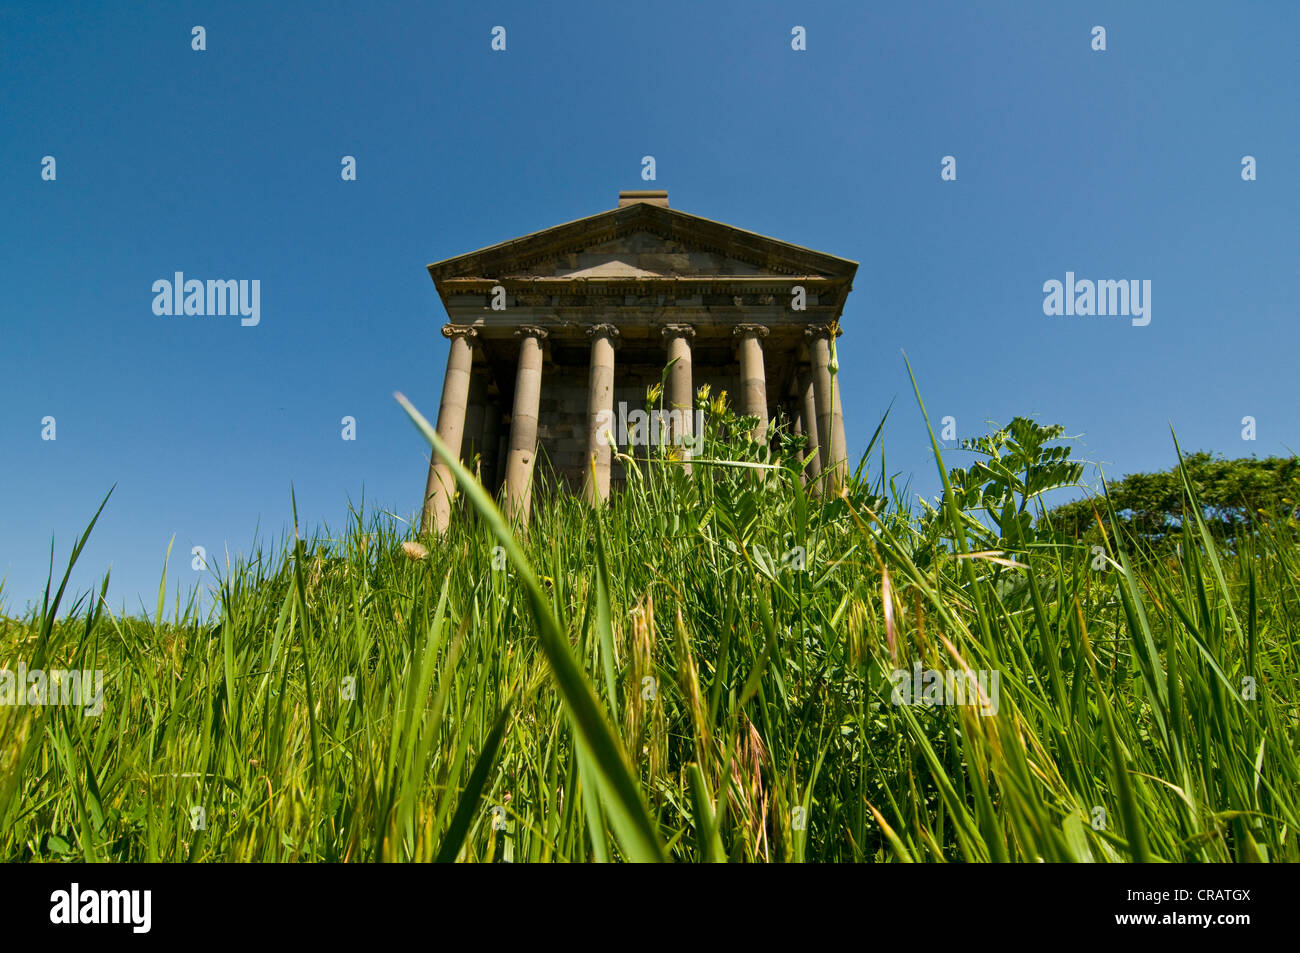 Garni Temple with many columns, Armenia, Middle East Stock Photo